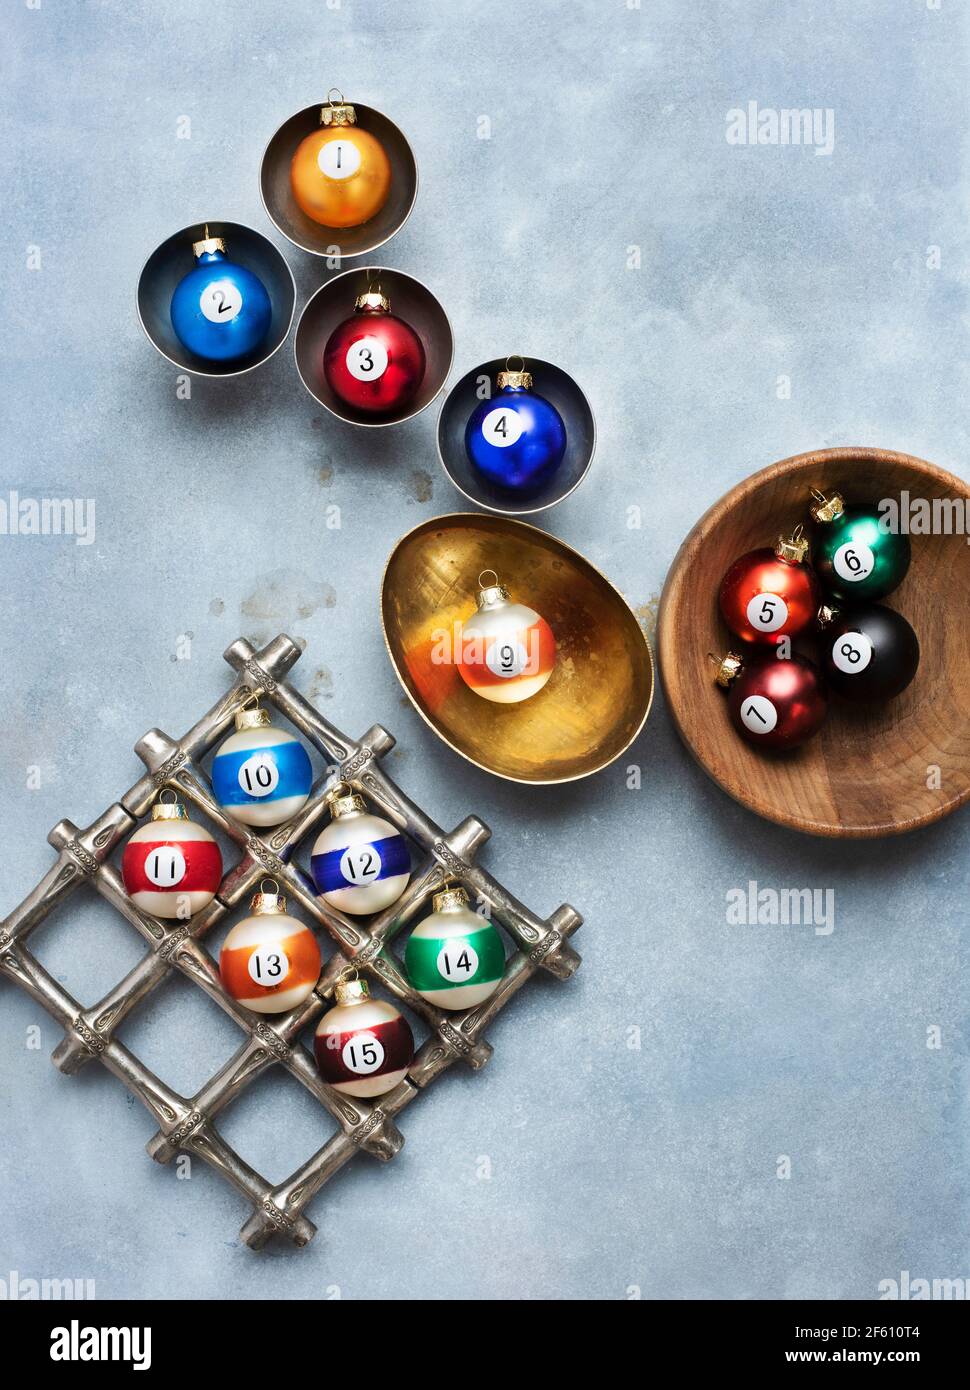 Christmas ornaments in gold, wood and silver bowls Stock Photo